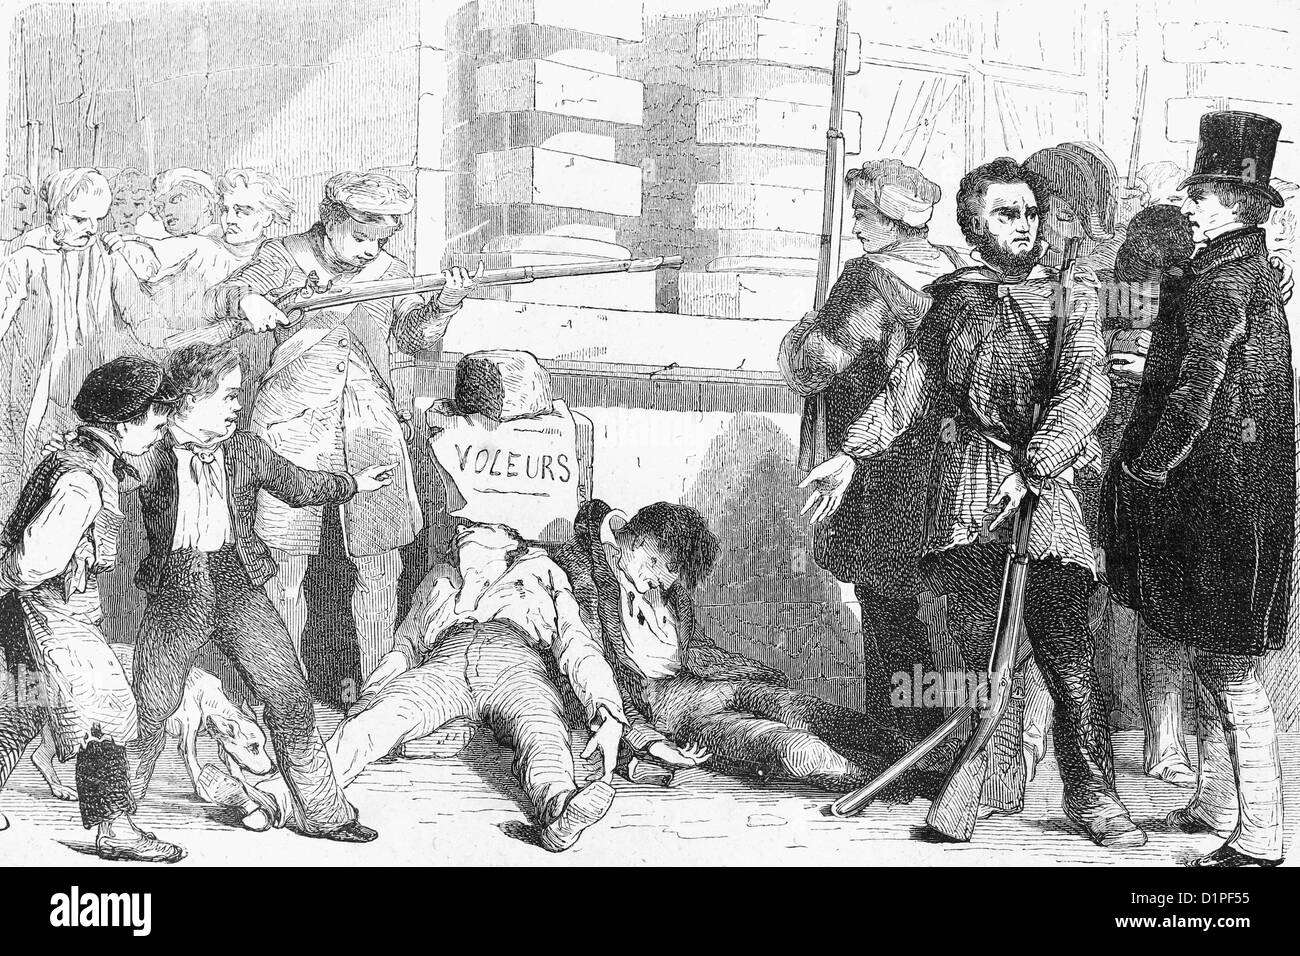 French revolution, 1830. The people punishes thieves. Antique illustration, 1856. Stock Photo